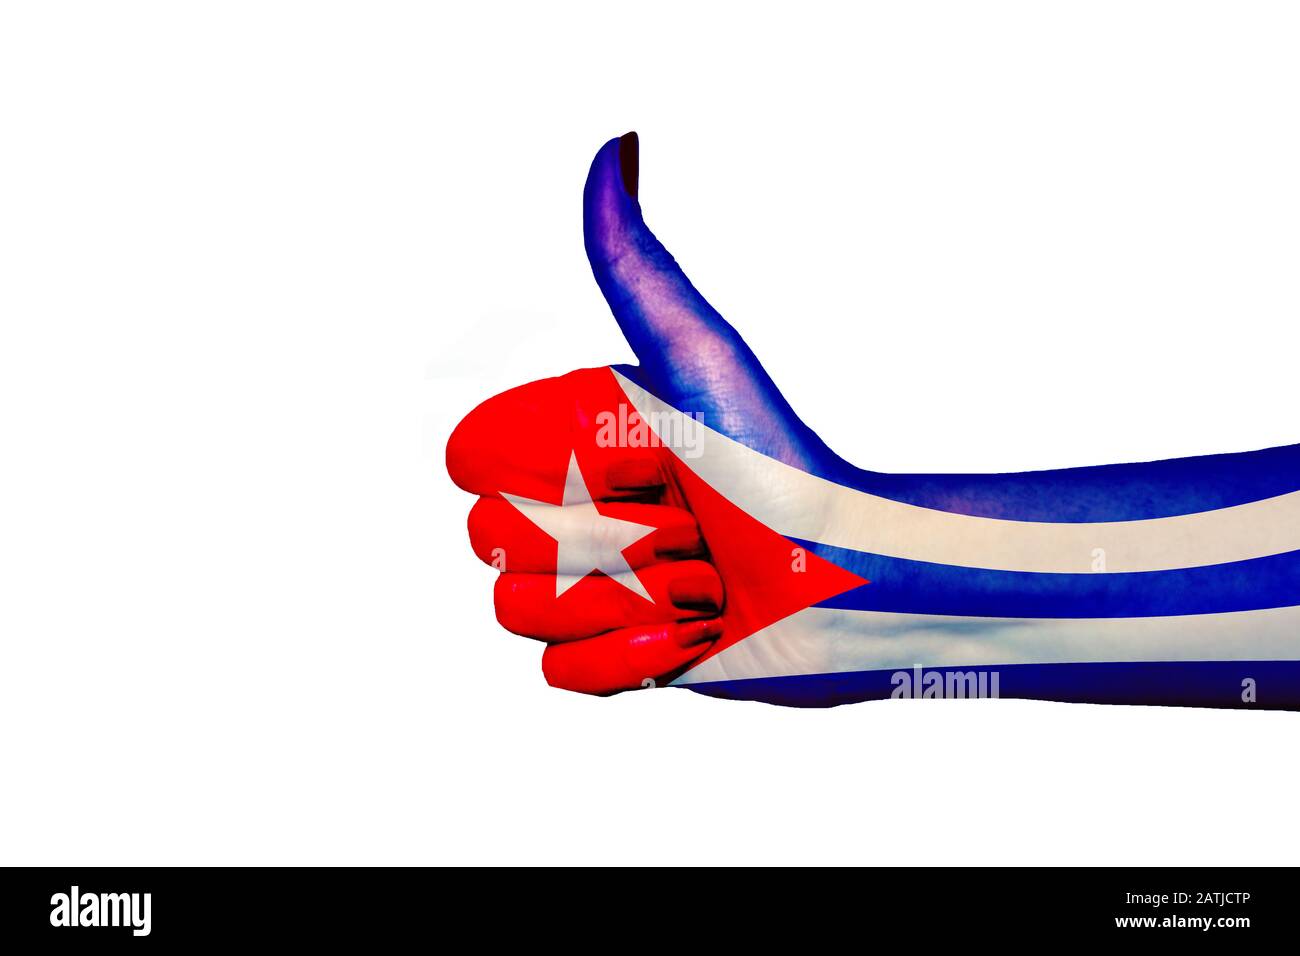 Cuba flag painted on hand showing thumbs up Stock Photo